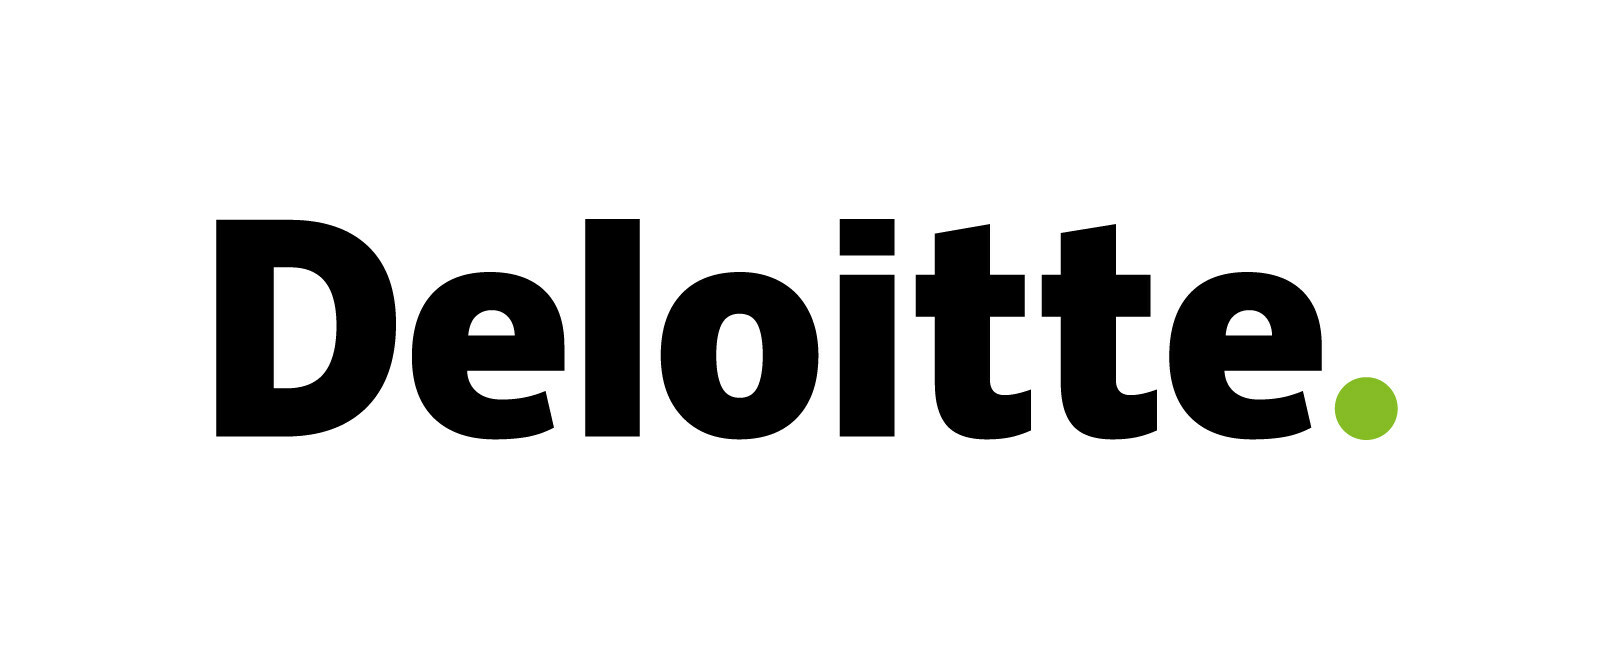 Deloitte Acquires Gryphon Scientific Business to Expand Security, Science and Public Health Capabilities